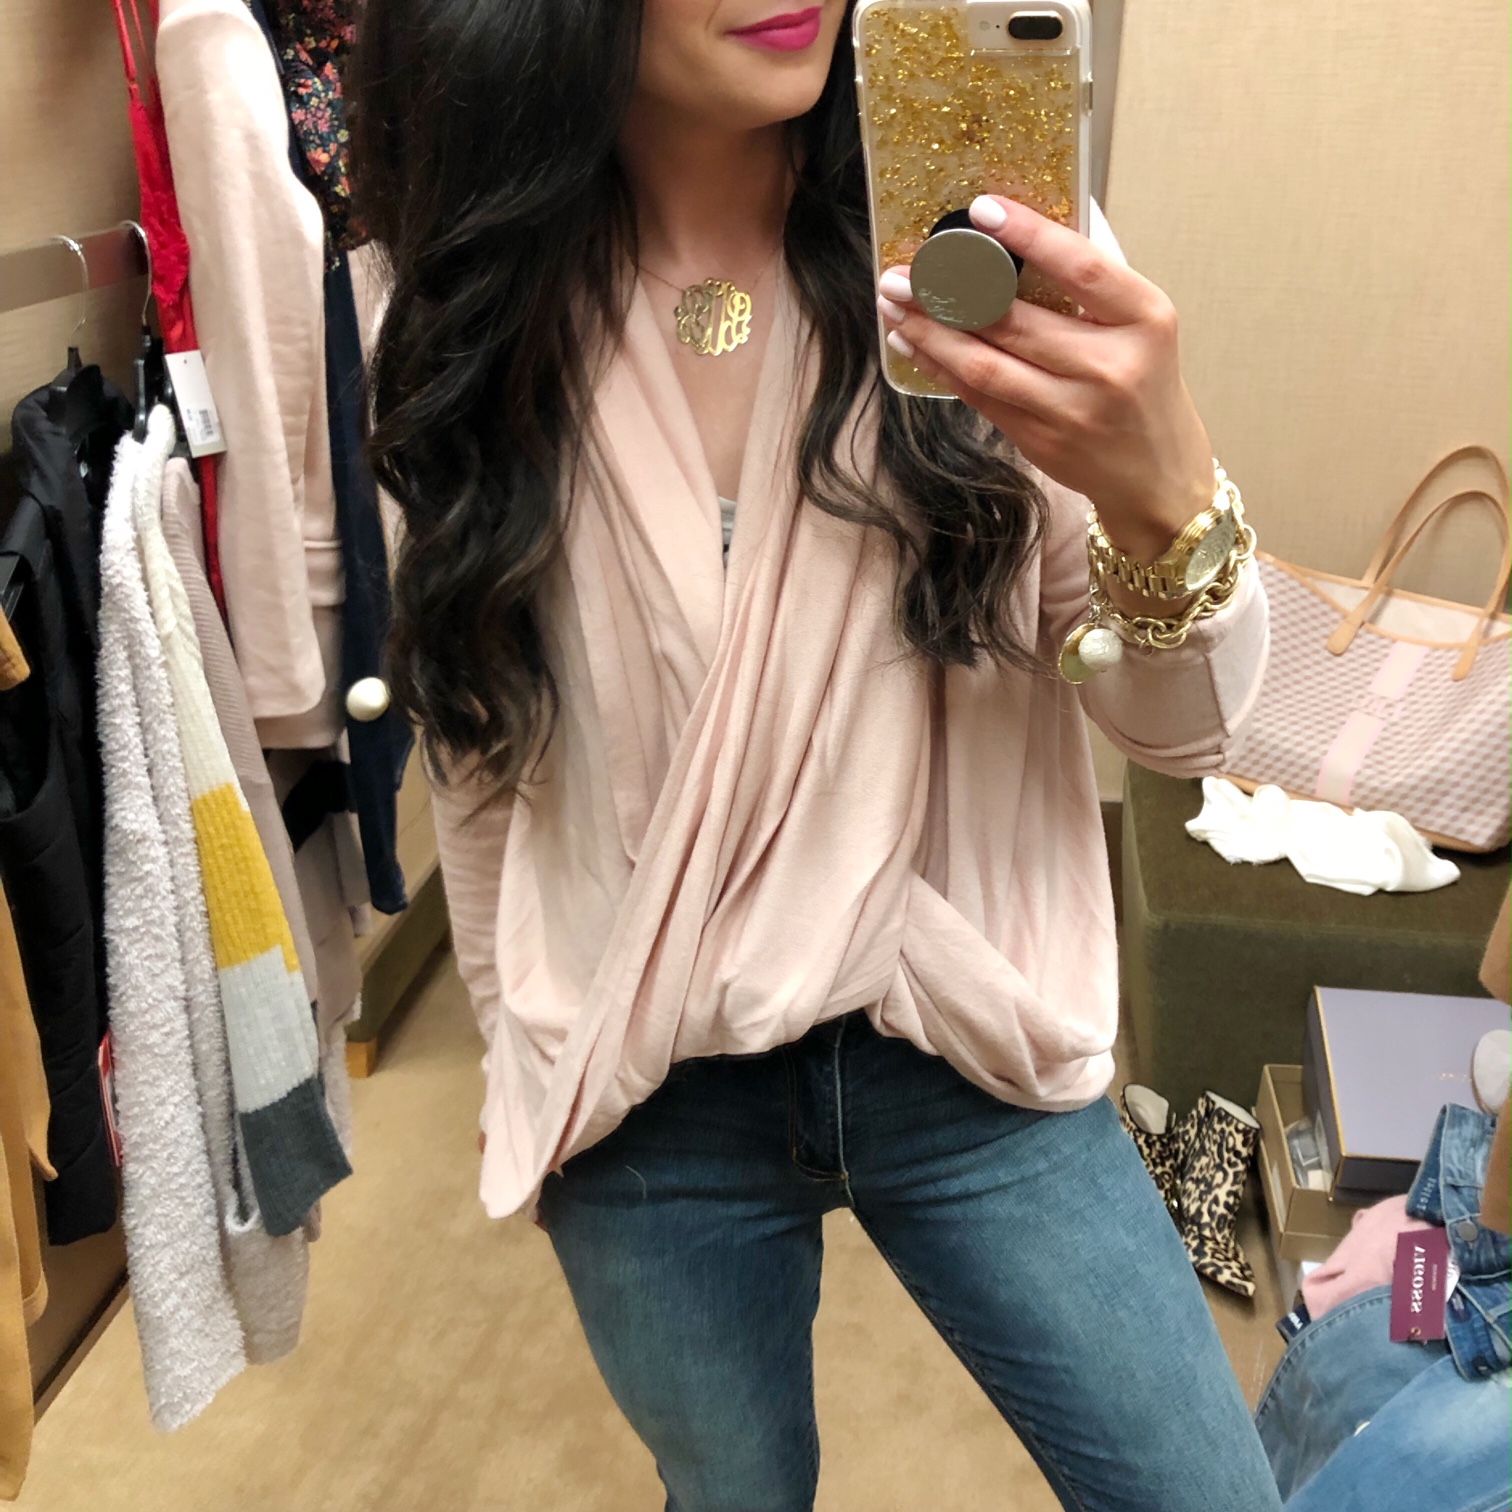 gibson pink wrap top - The Double Take Girls